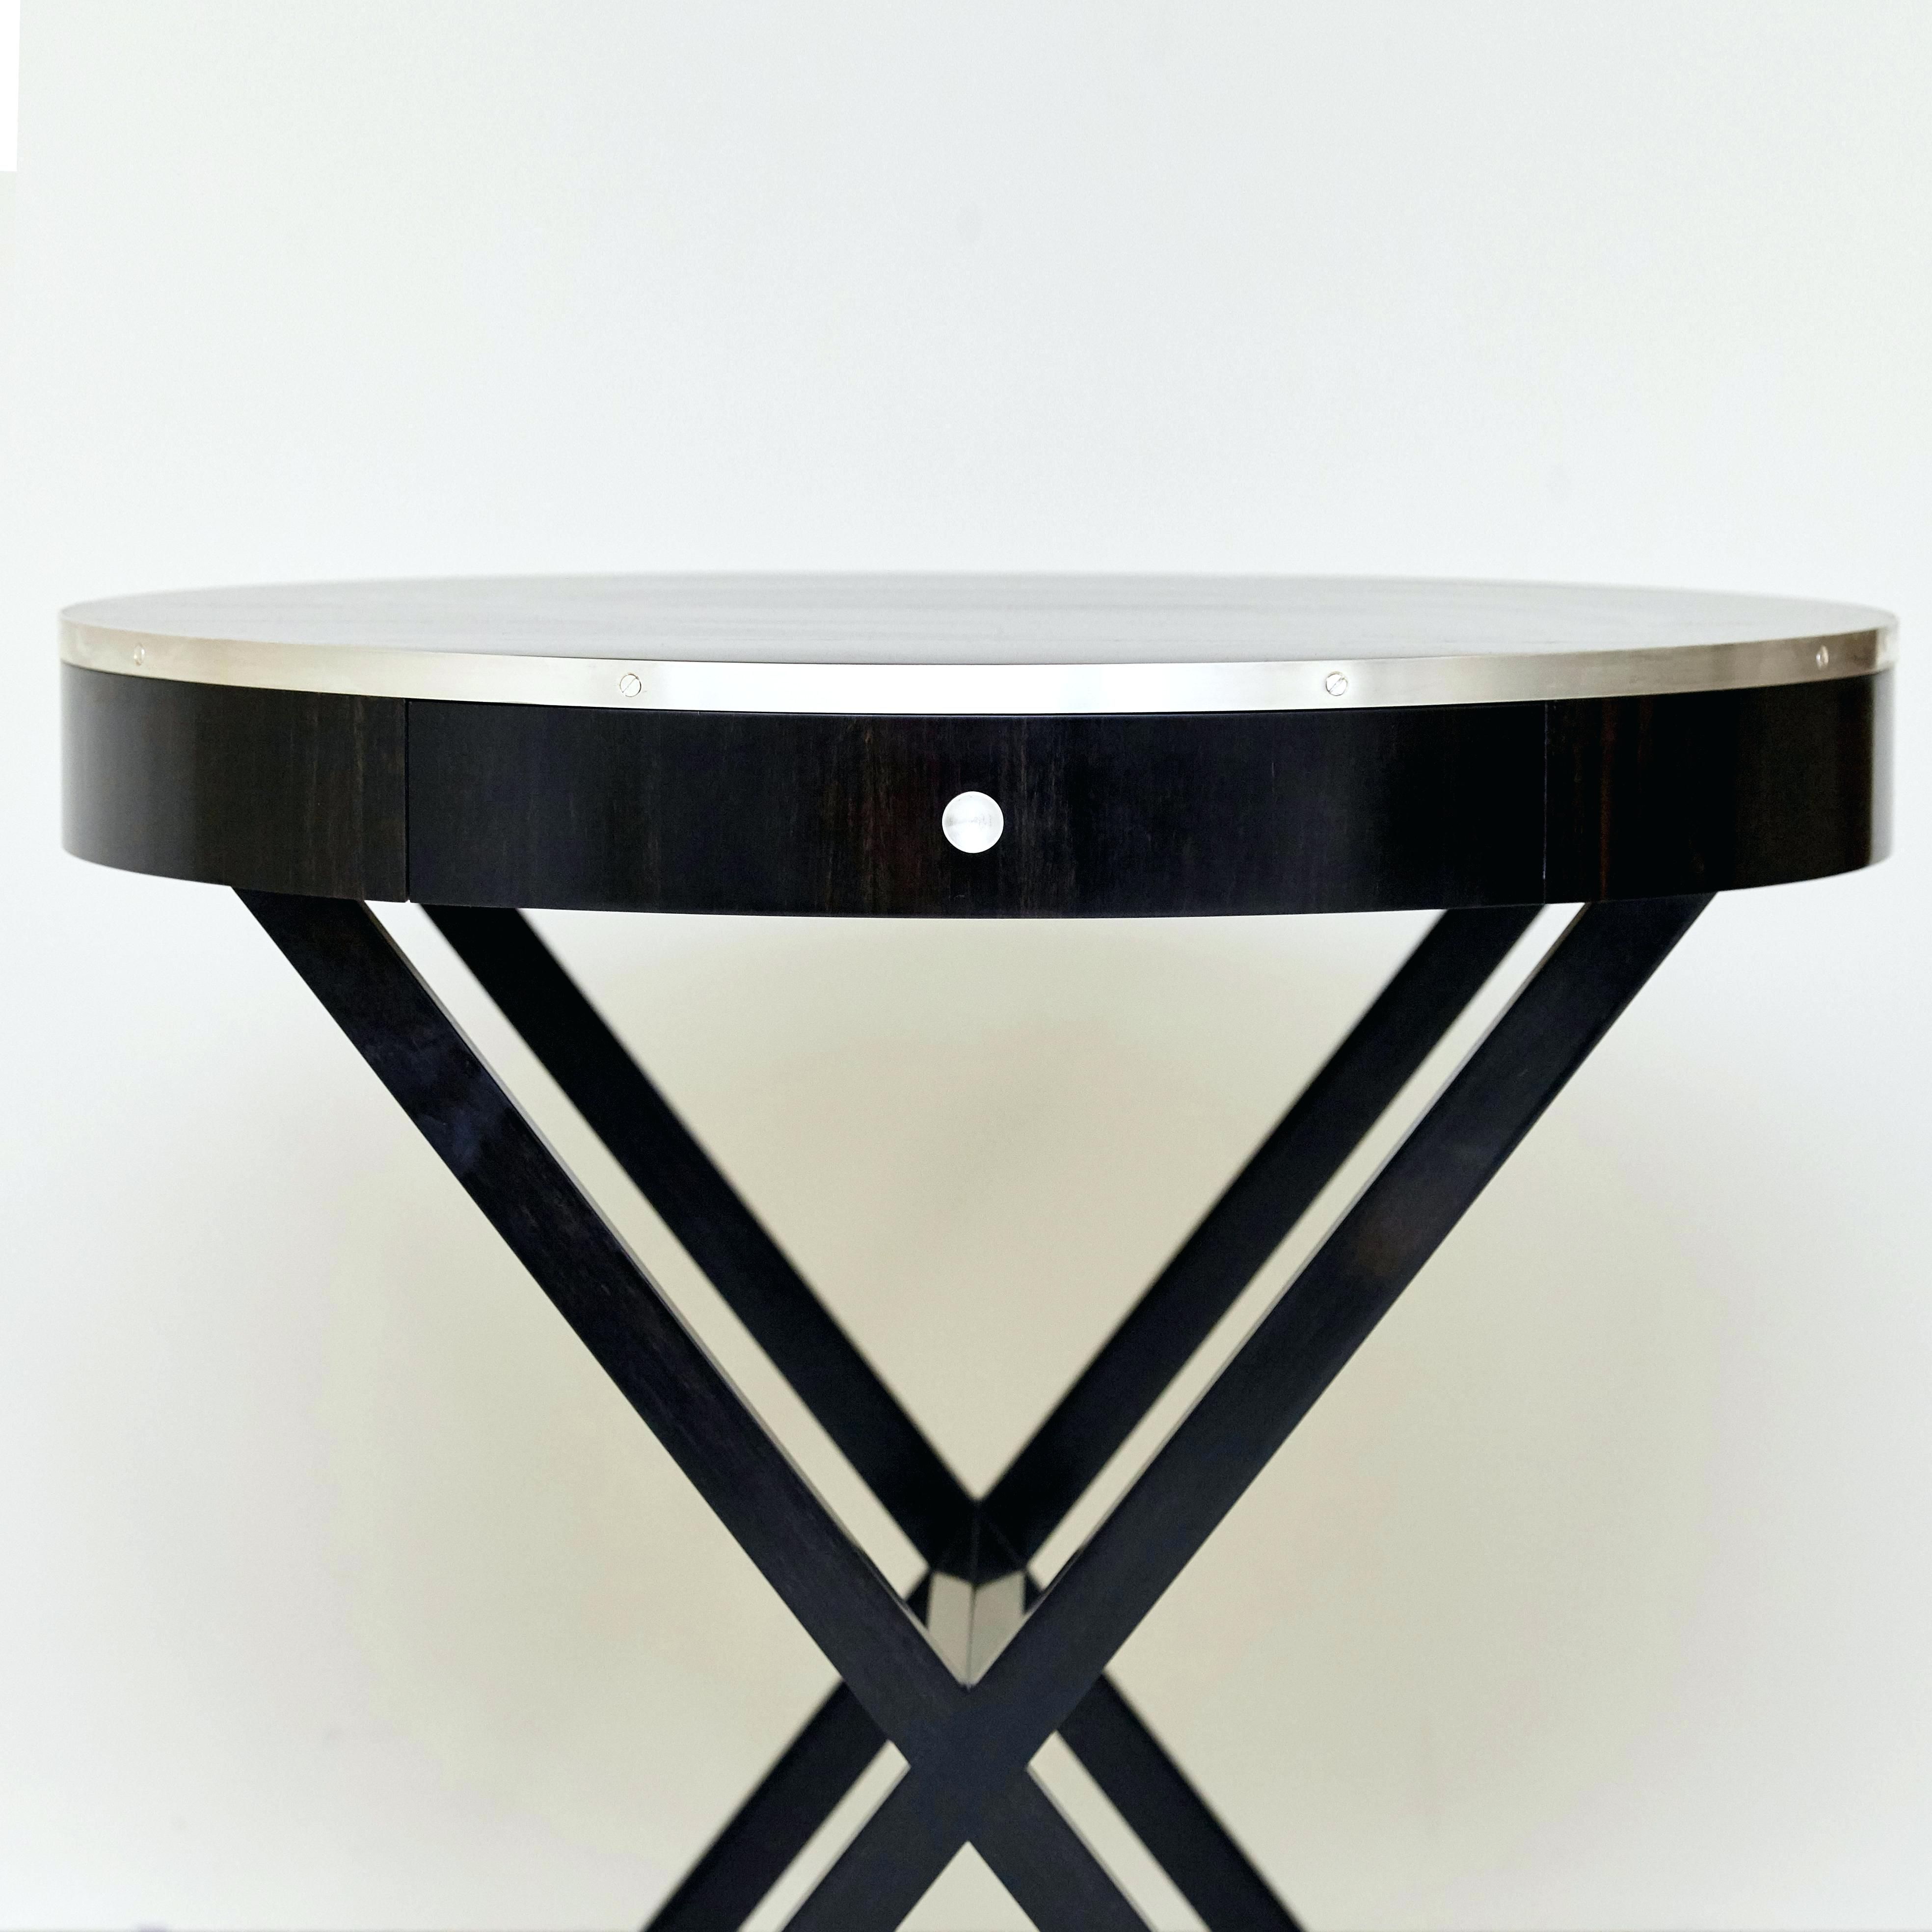 2020 Silver Orchid Ipsen Contemporary Glass Top Coffee Tables Pertaining To Modern Silver Coffee Table – Modafinilcats.co (Gallery 19 of 20)